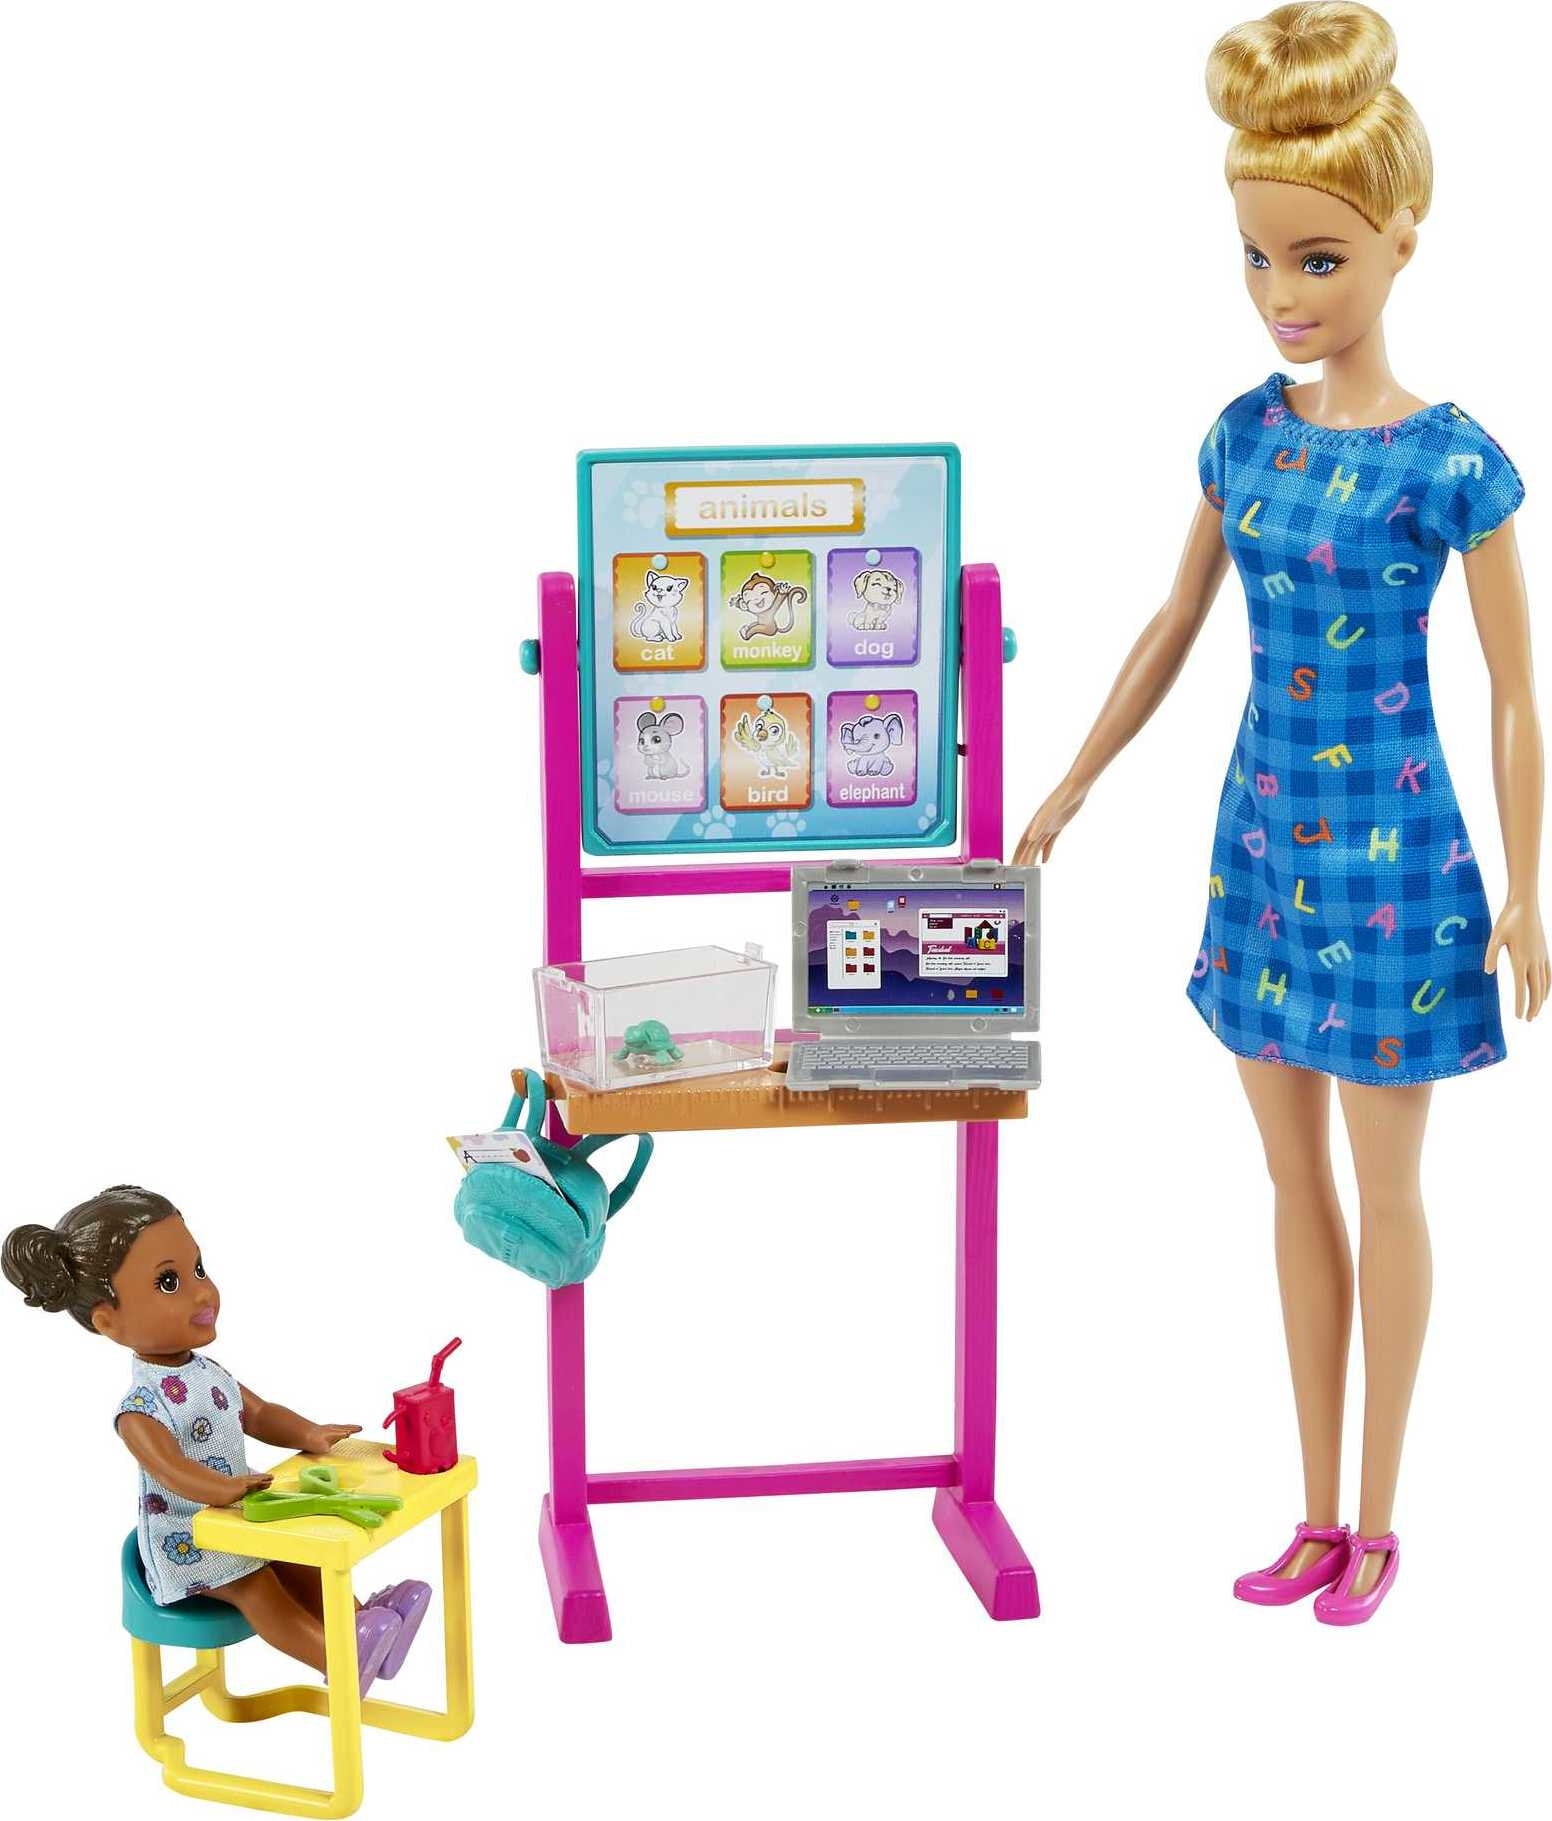 Barbie Careers Teacher Playset with Blonde Fashion Doll, 1 Toddler Doll, Furniture & Accessories